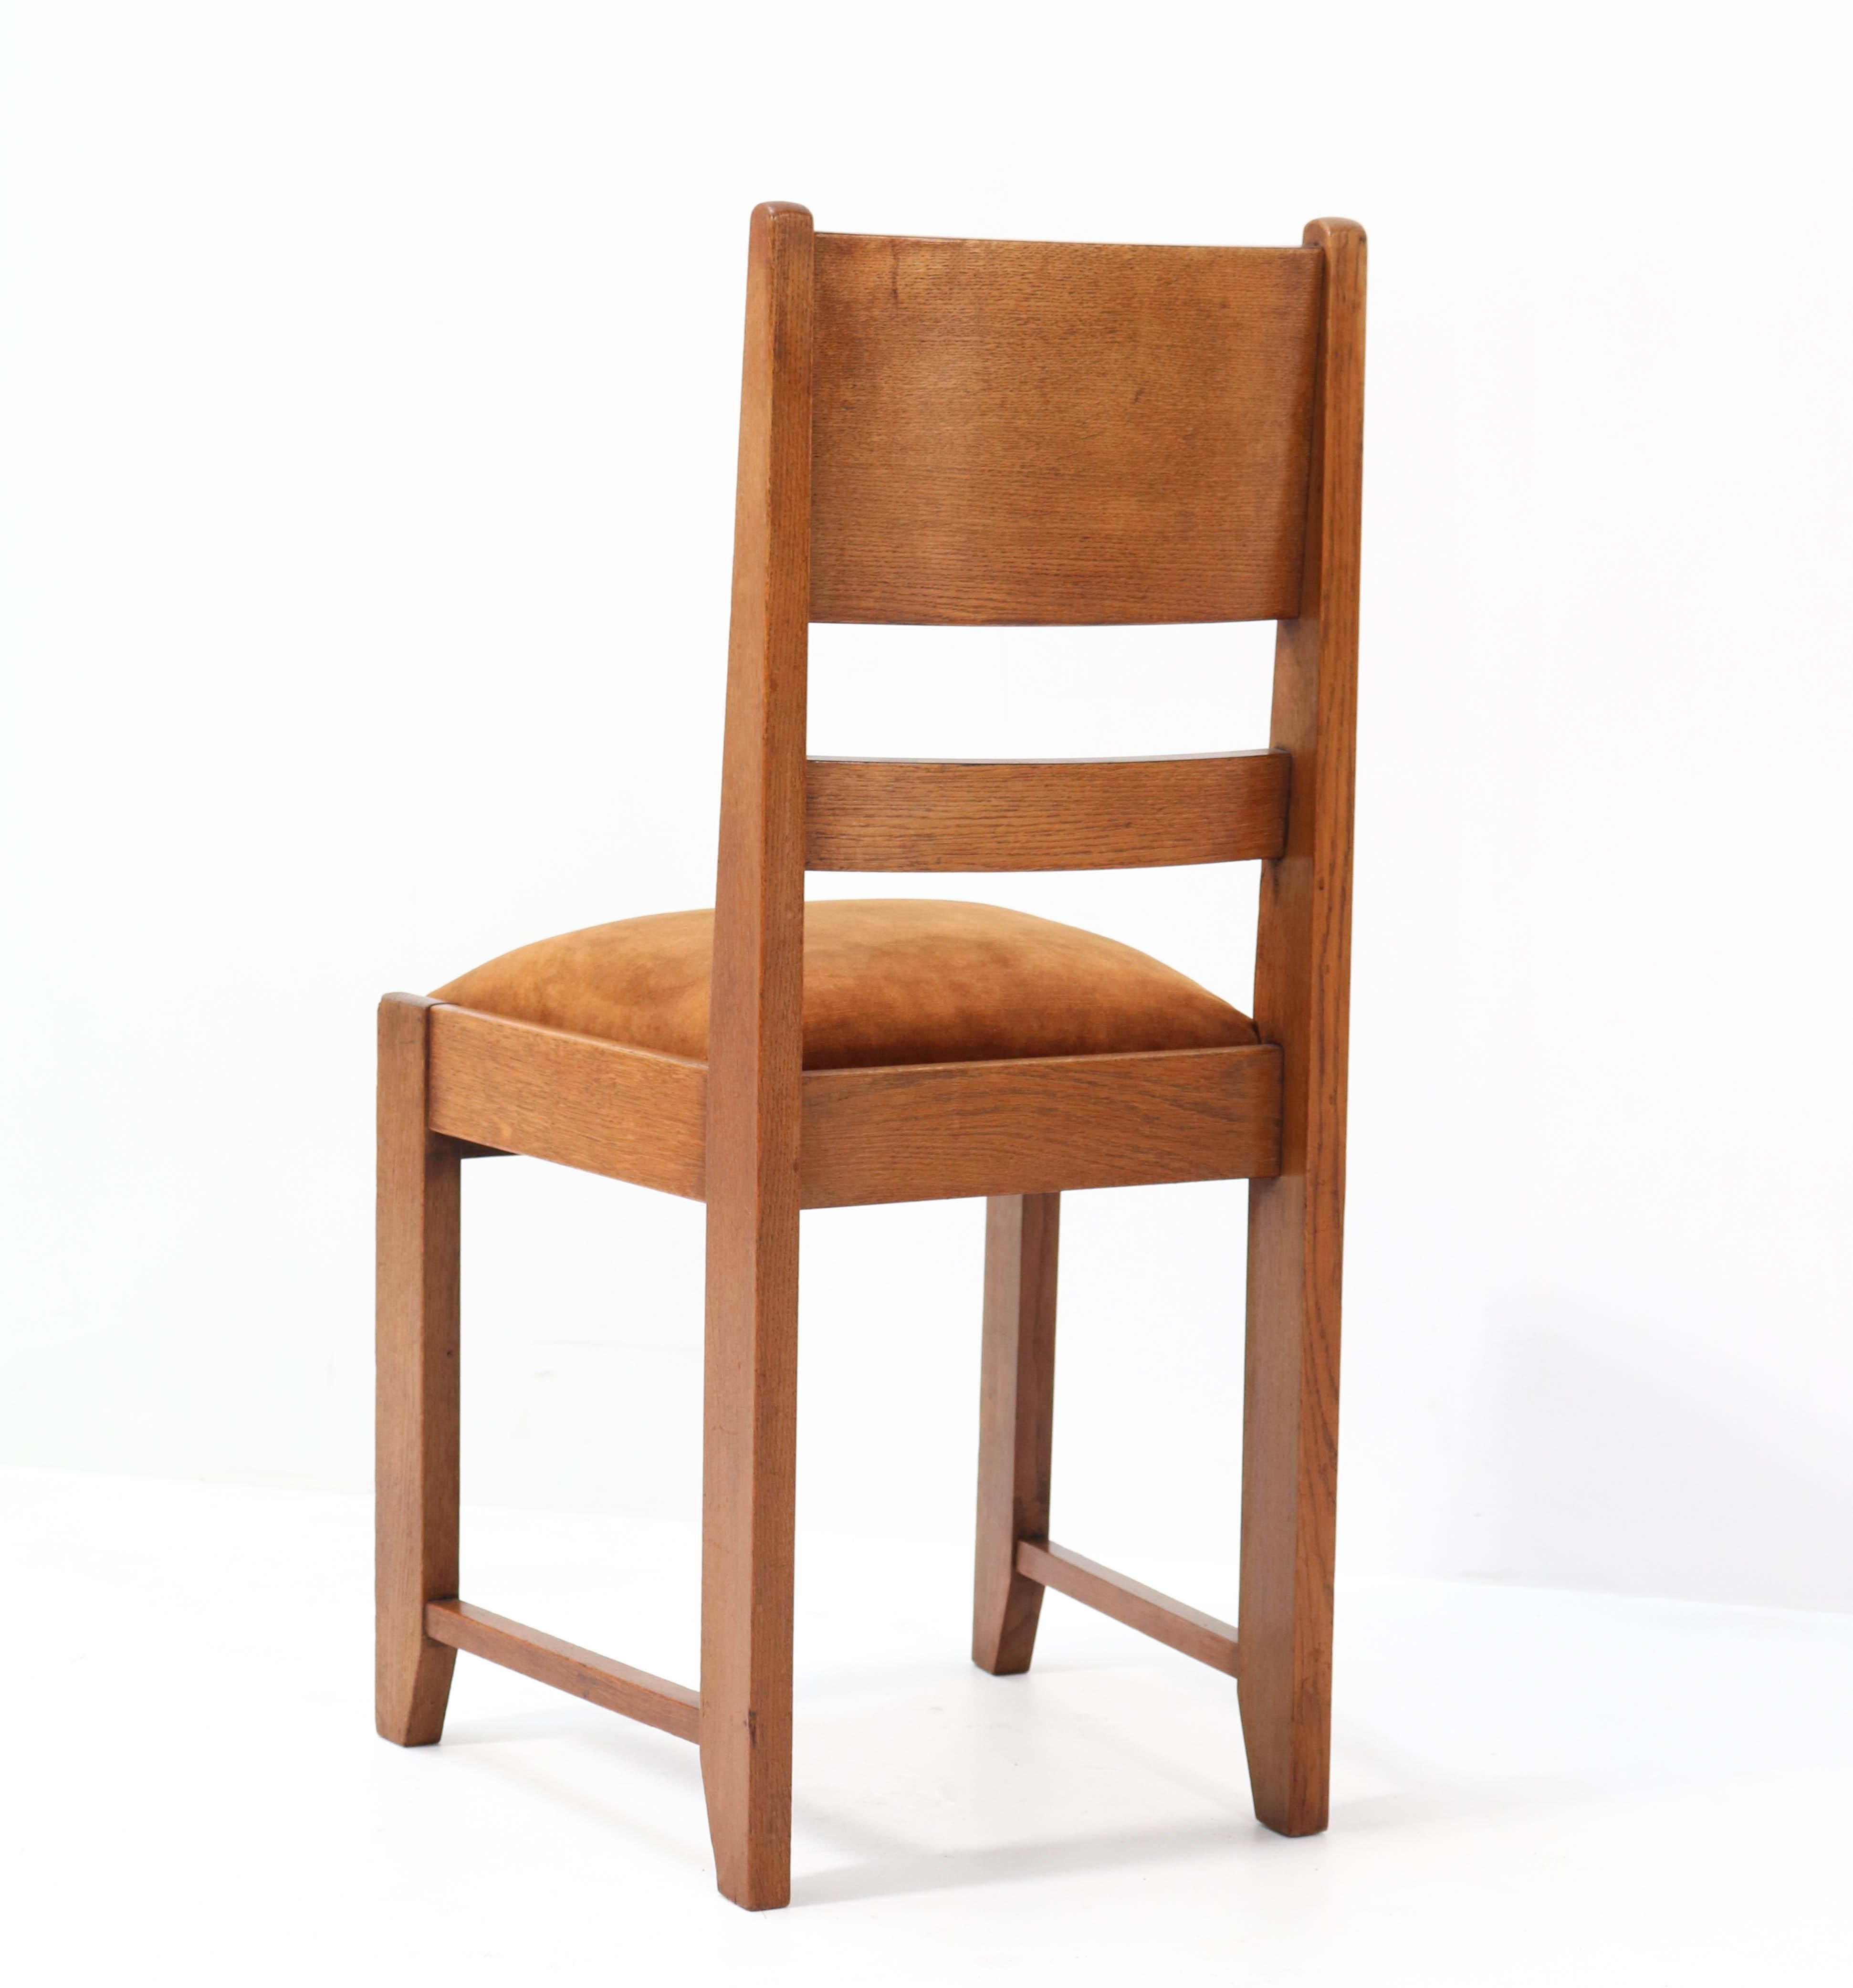 Four Oak Art Deco Haagse School Dining Room Chairs, 1920s 2